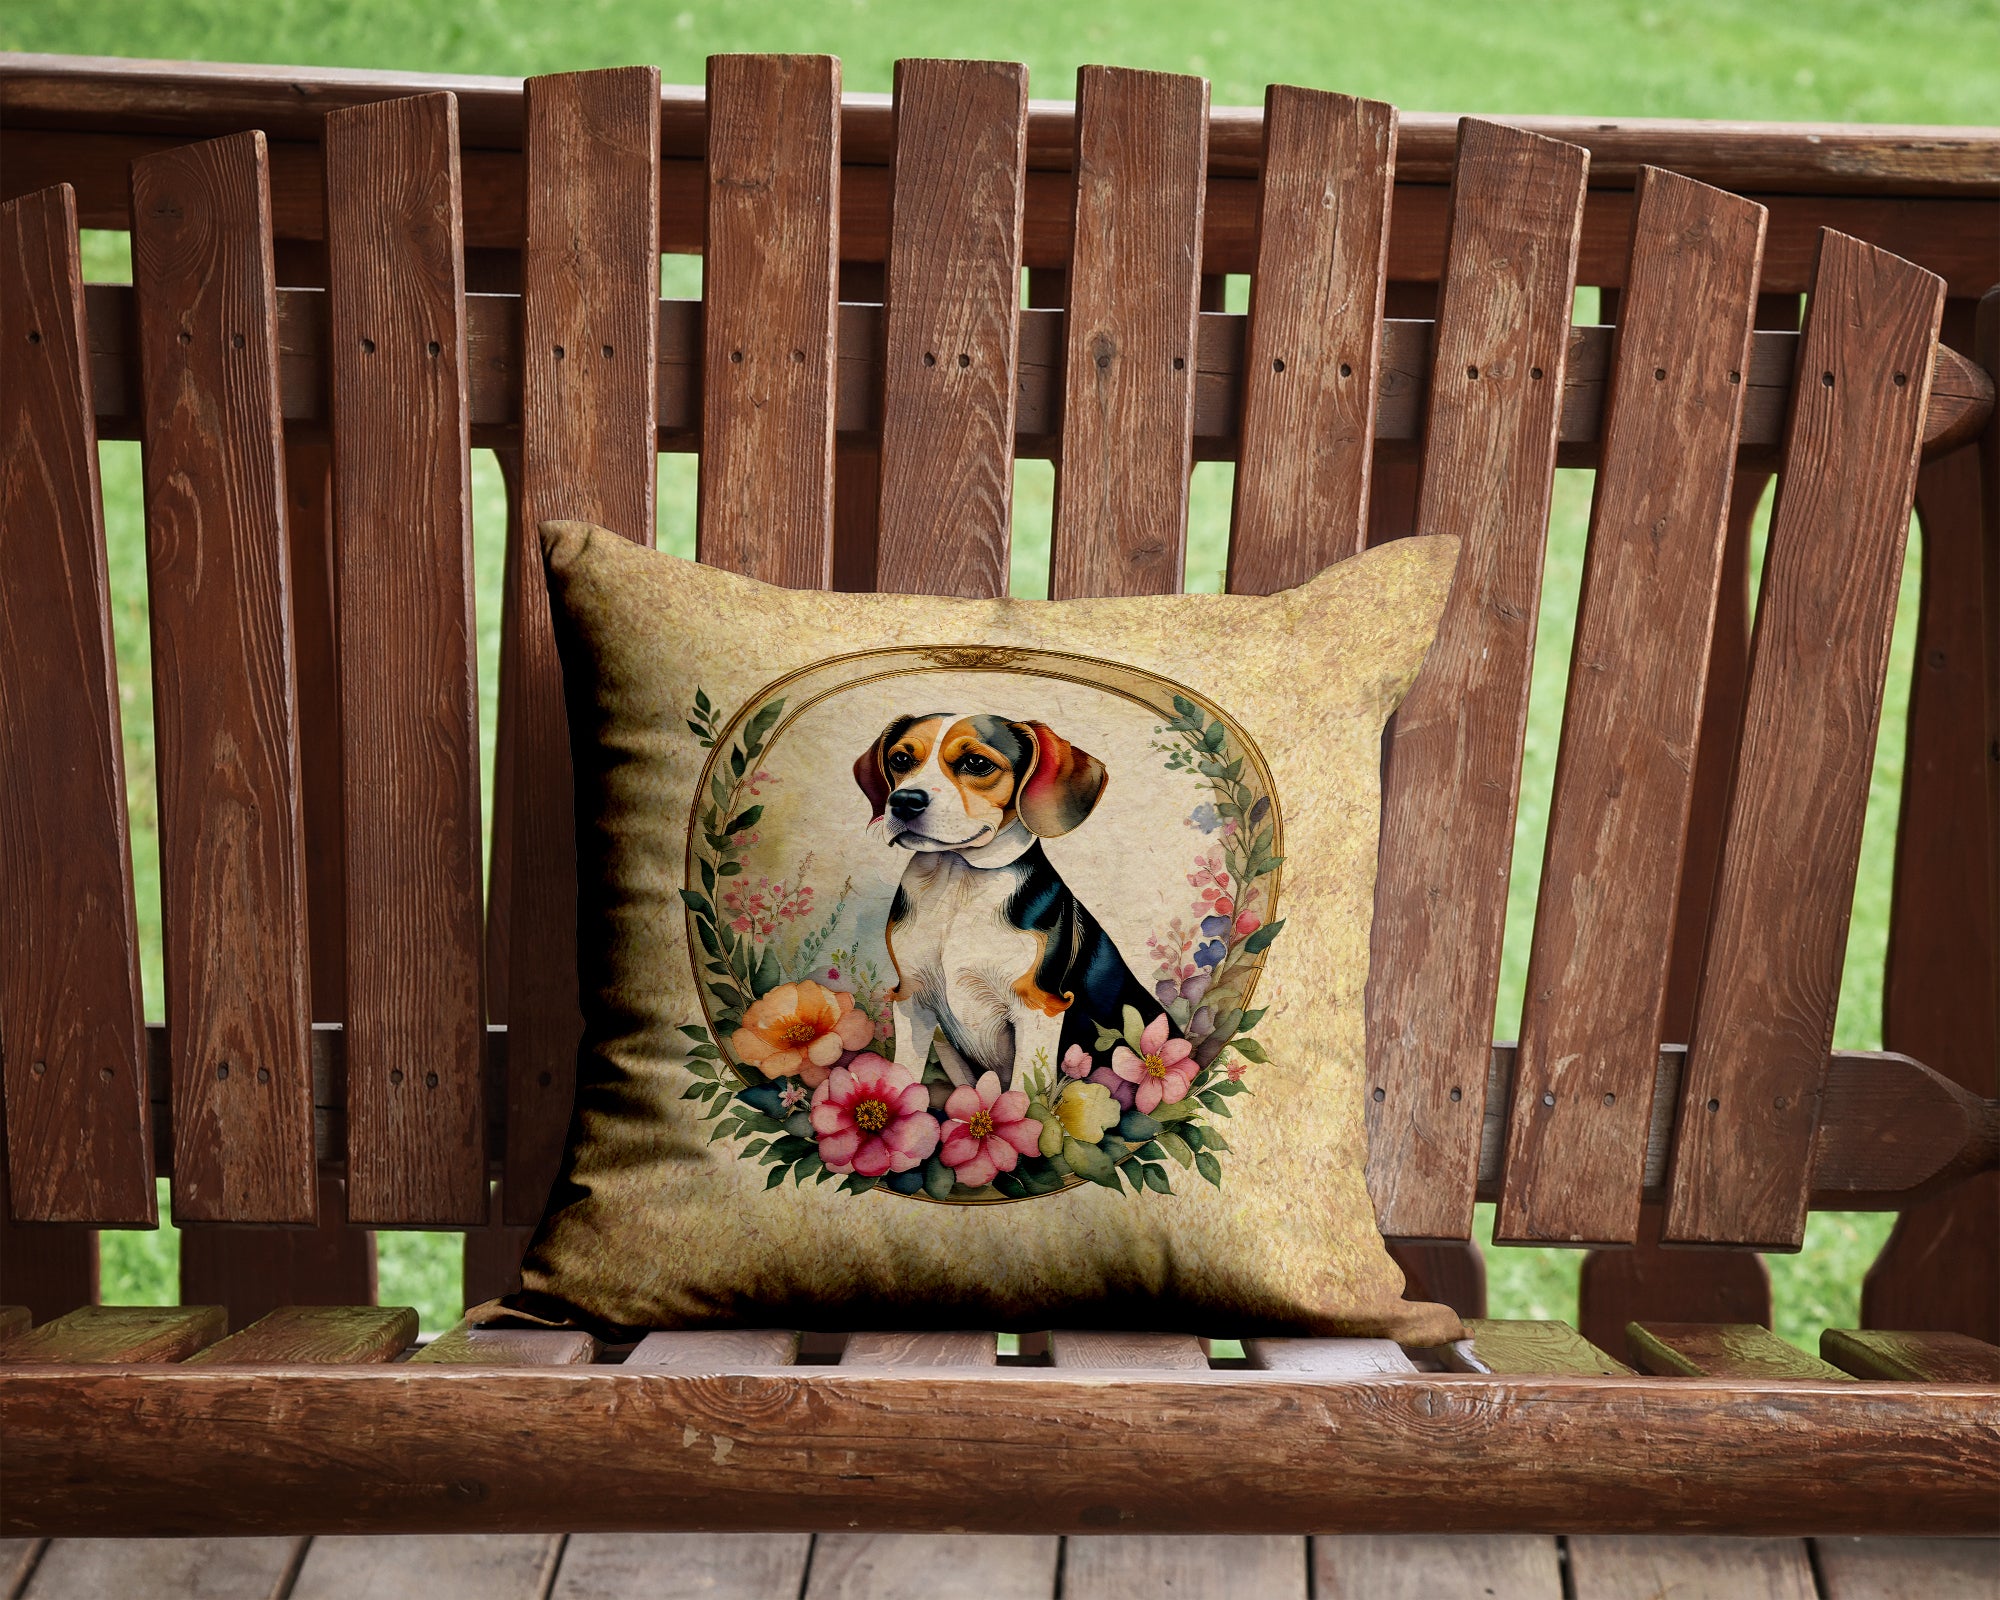 Buy this Beagle and Flowers Fabric Decorative Pillow